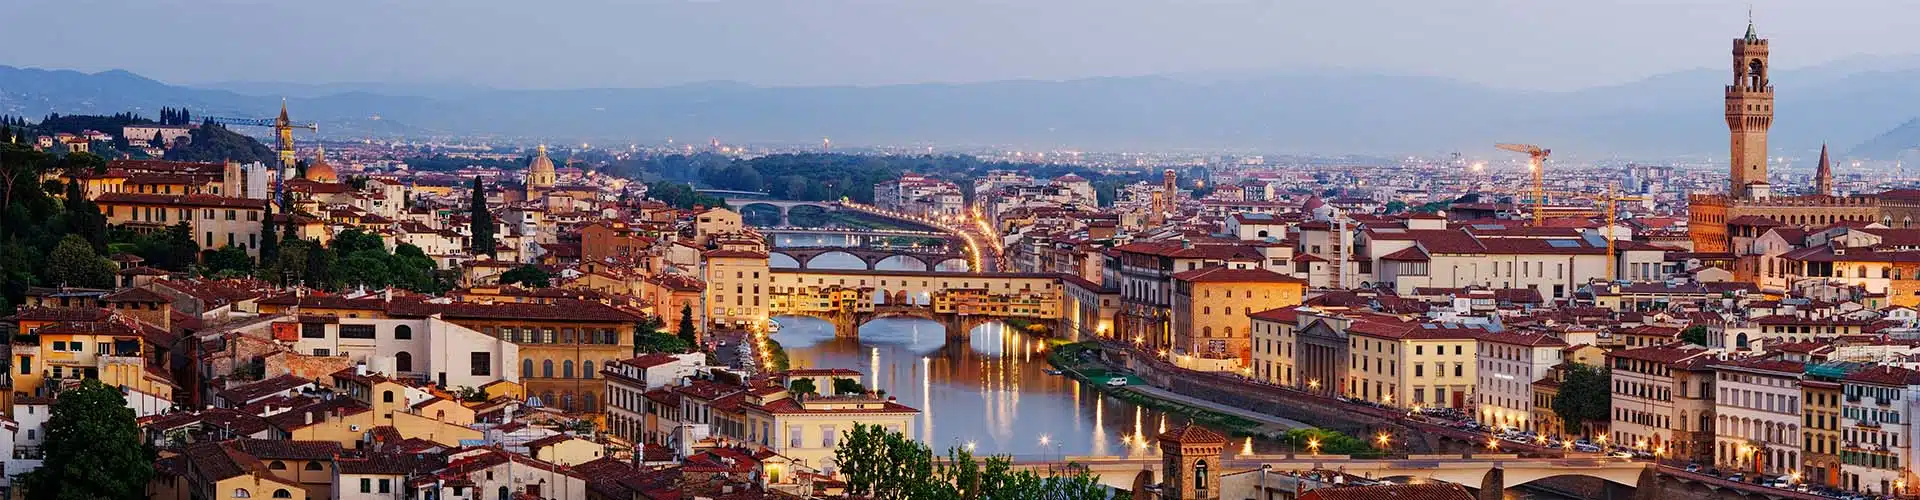 View over the rooftops of Florence and the river Arno at dusk with city lights